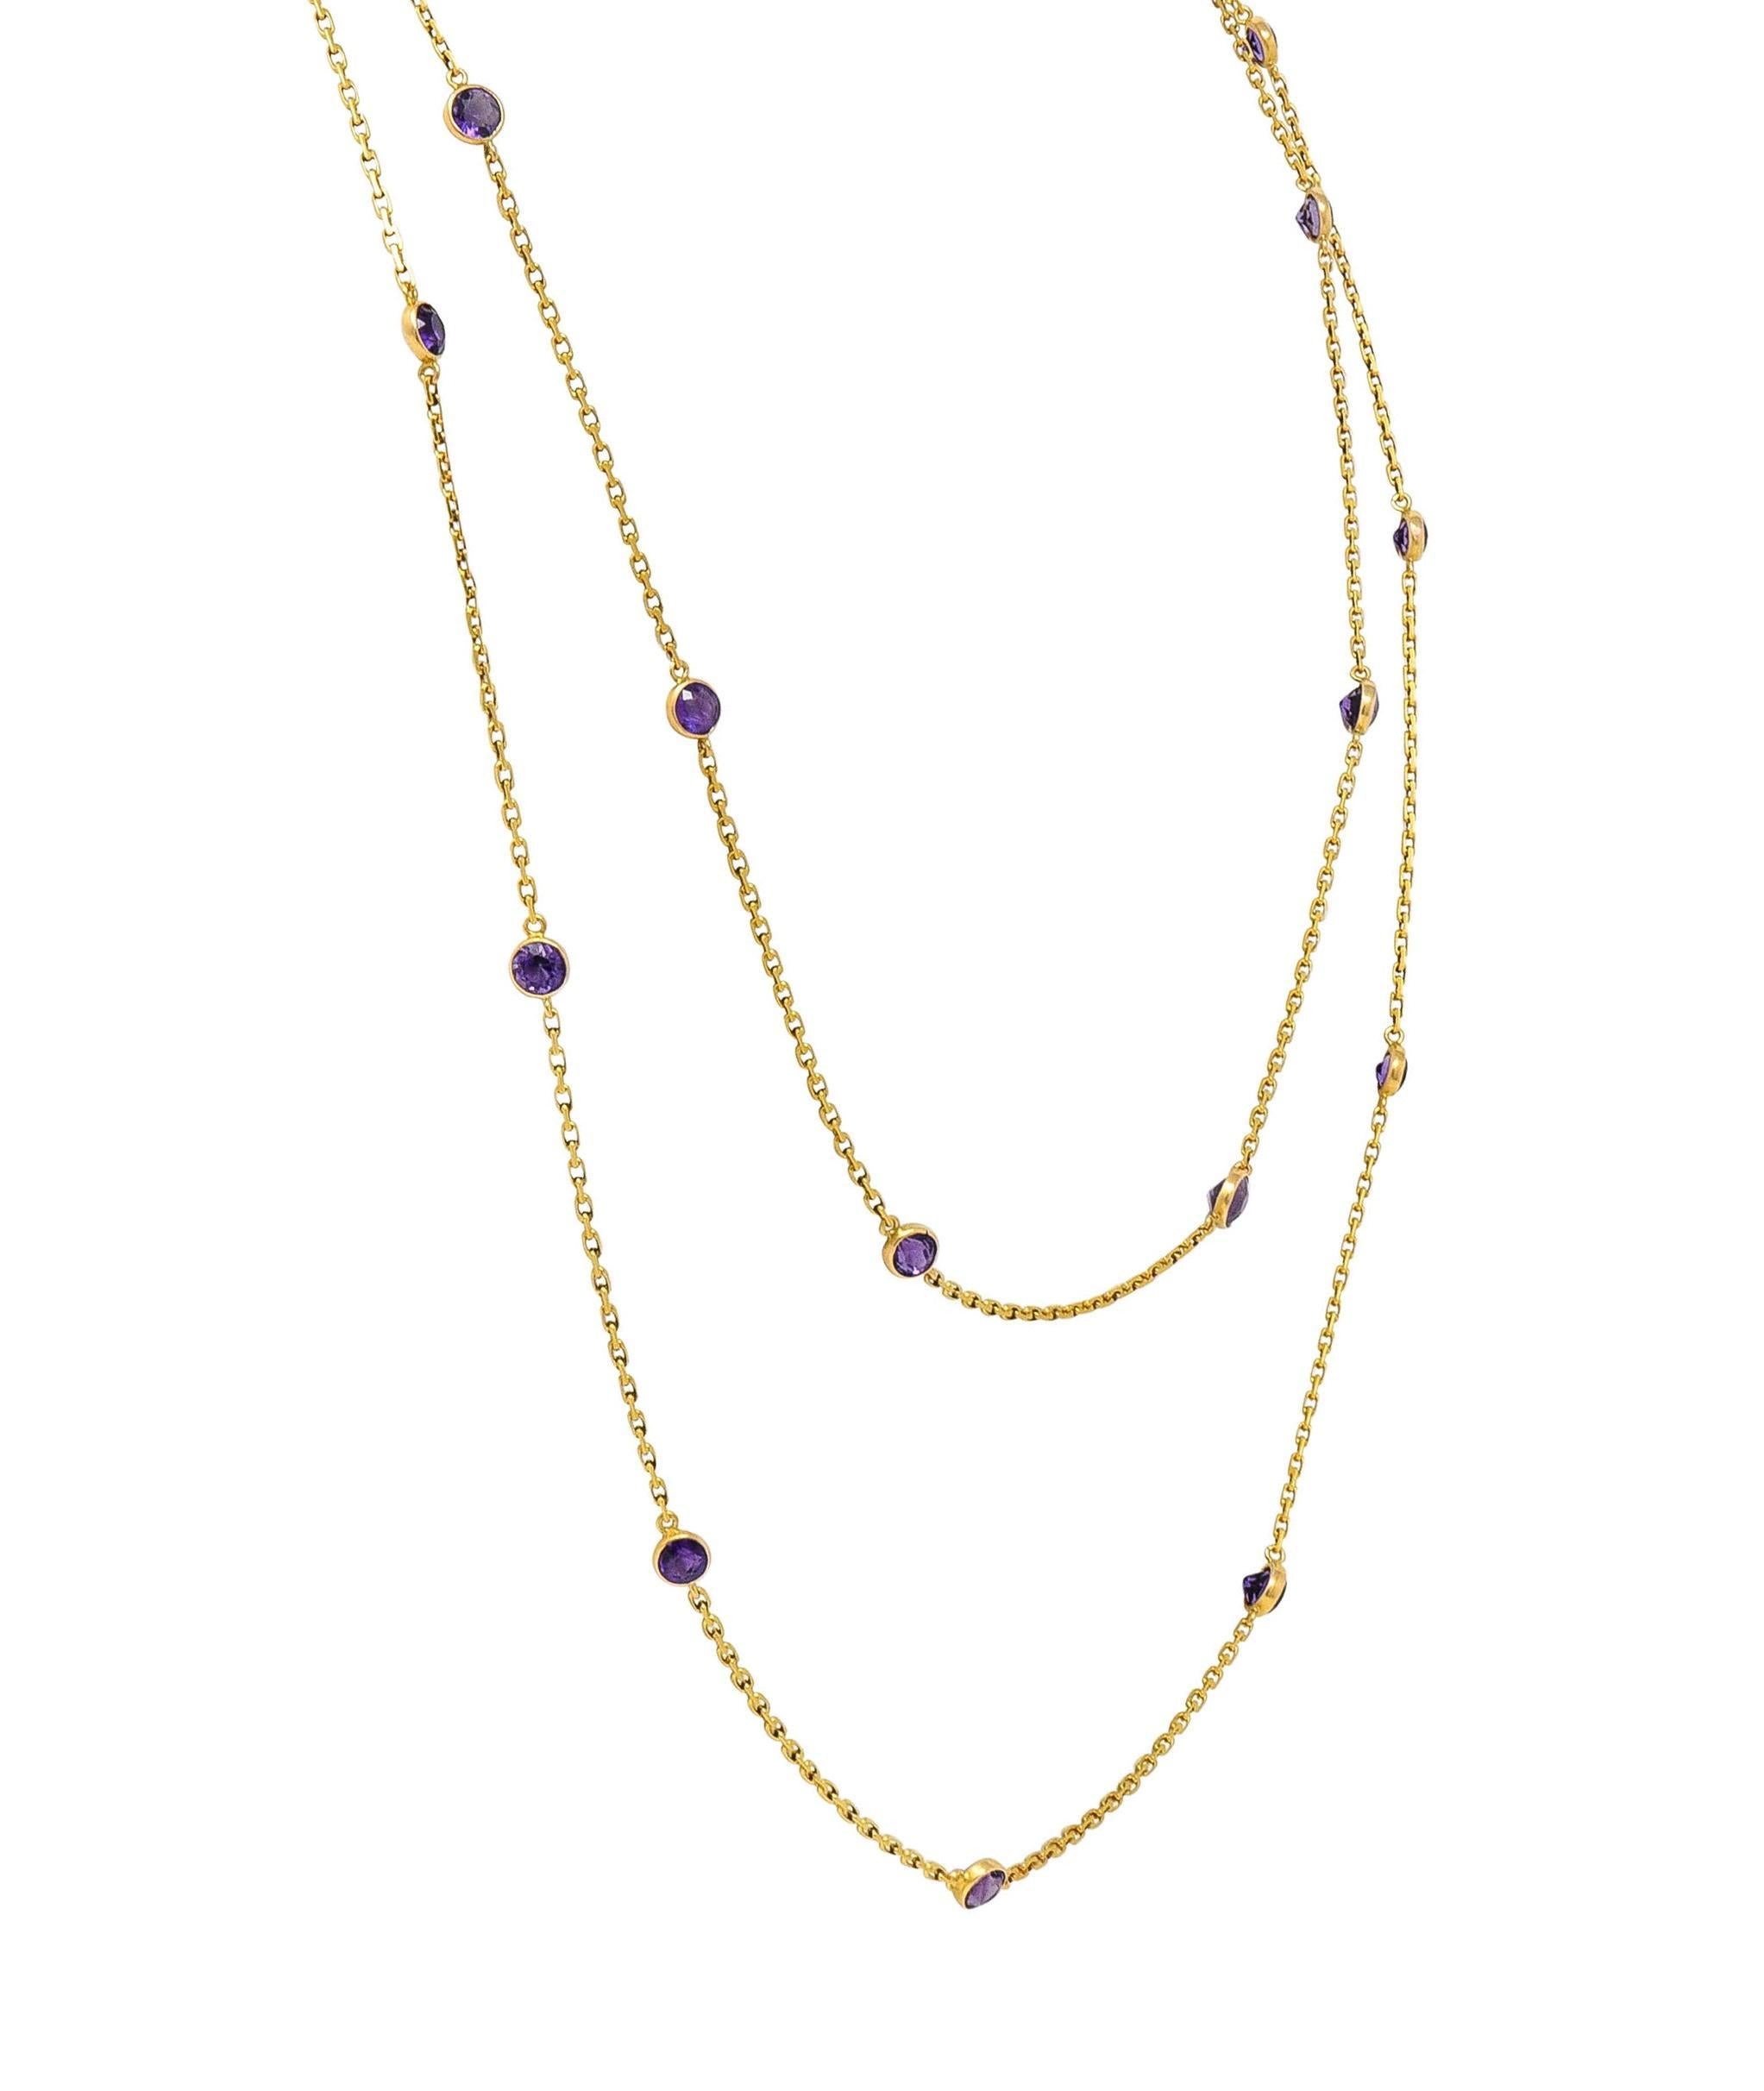 Women's or Men's Victorian Amethyst 18K Yellow Gold 59 IN Long Antique Station Chain Necklace For Sale